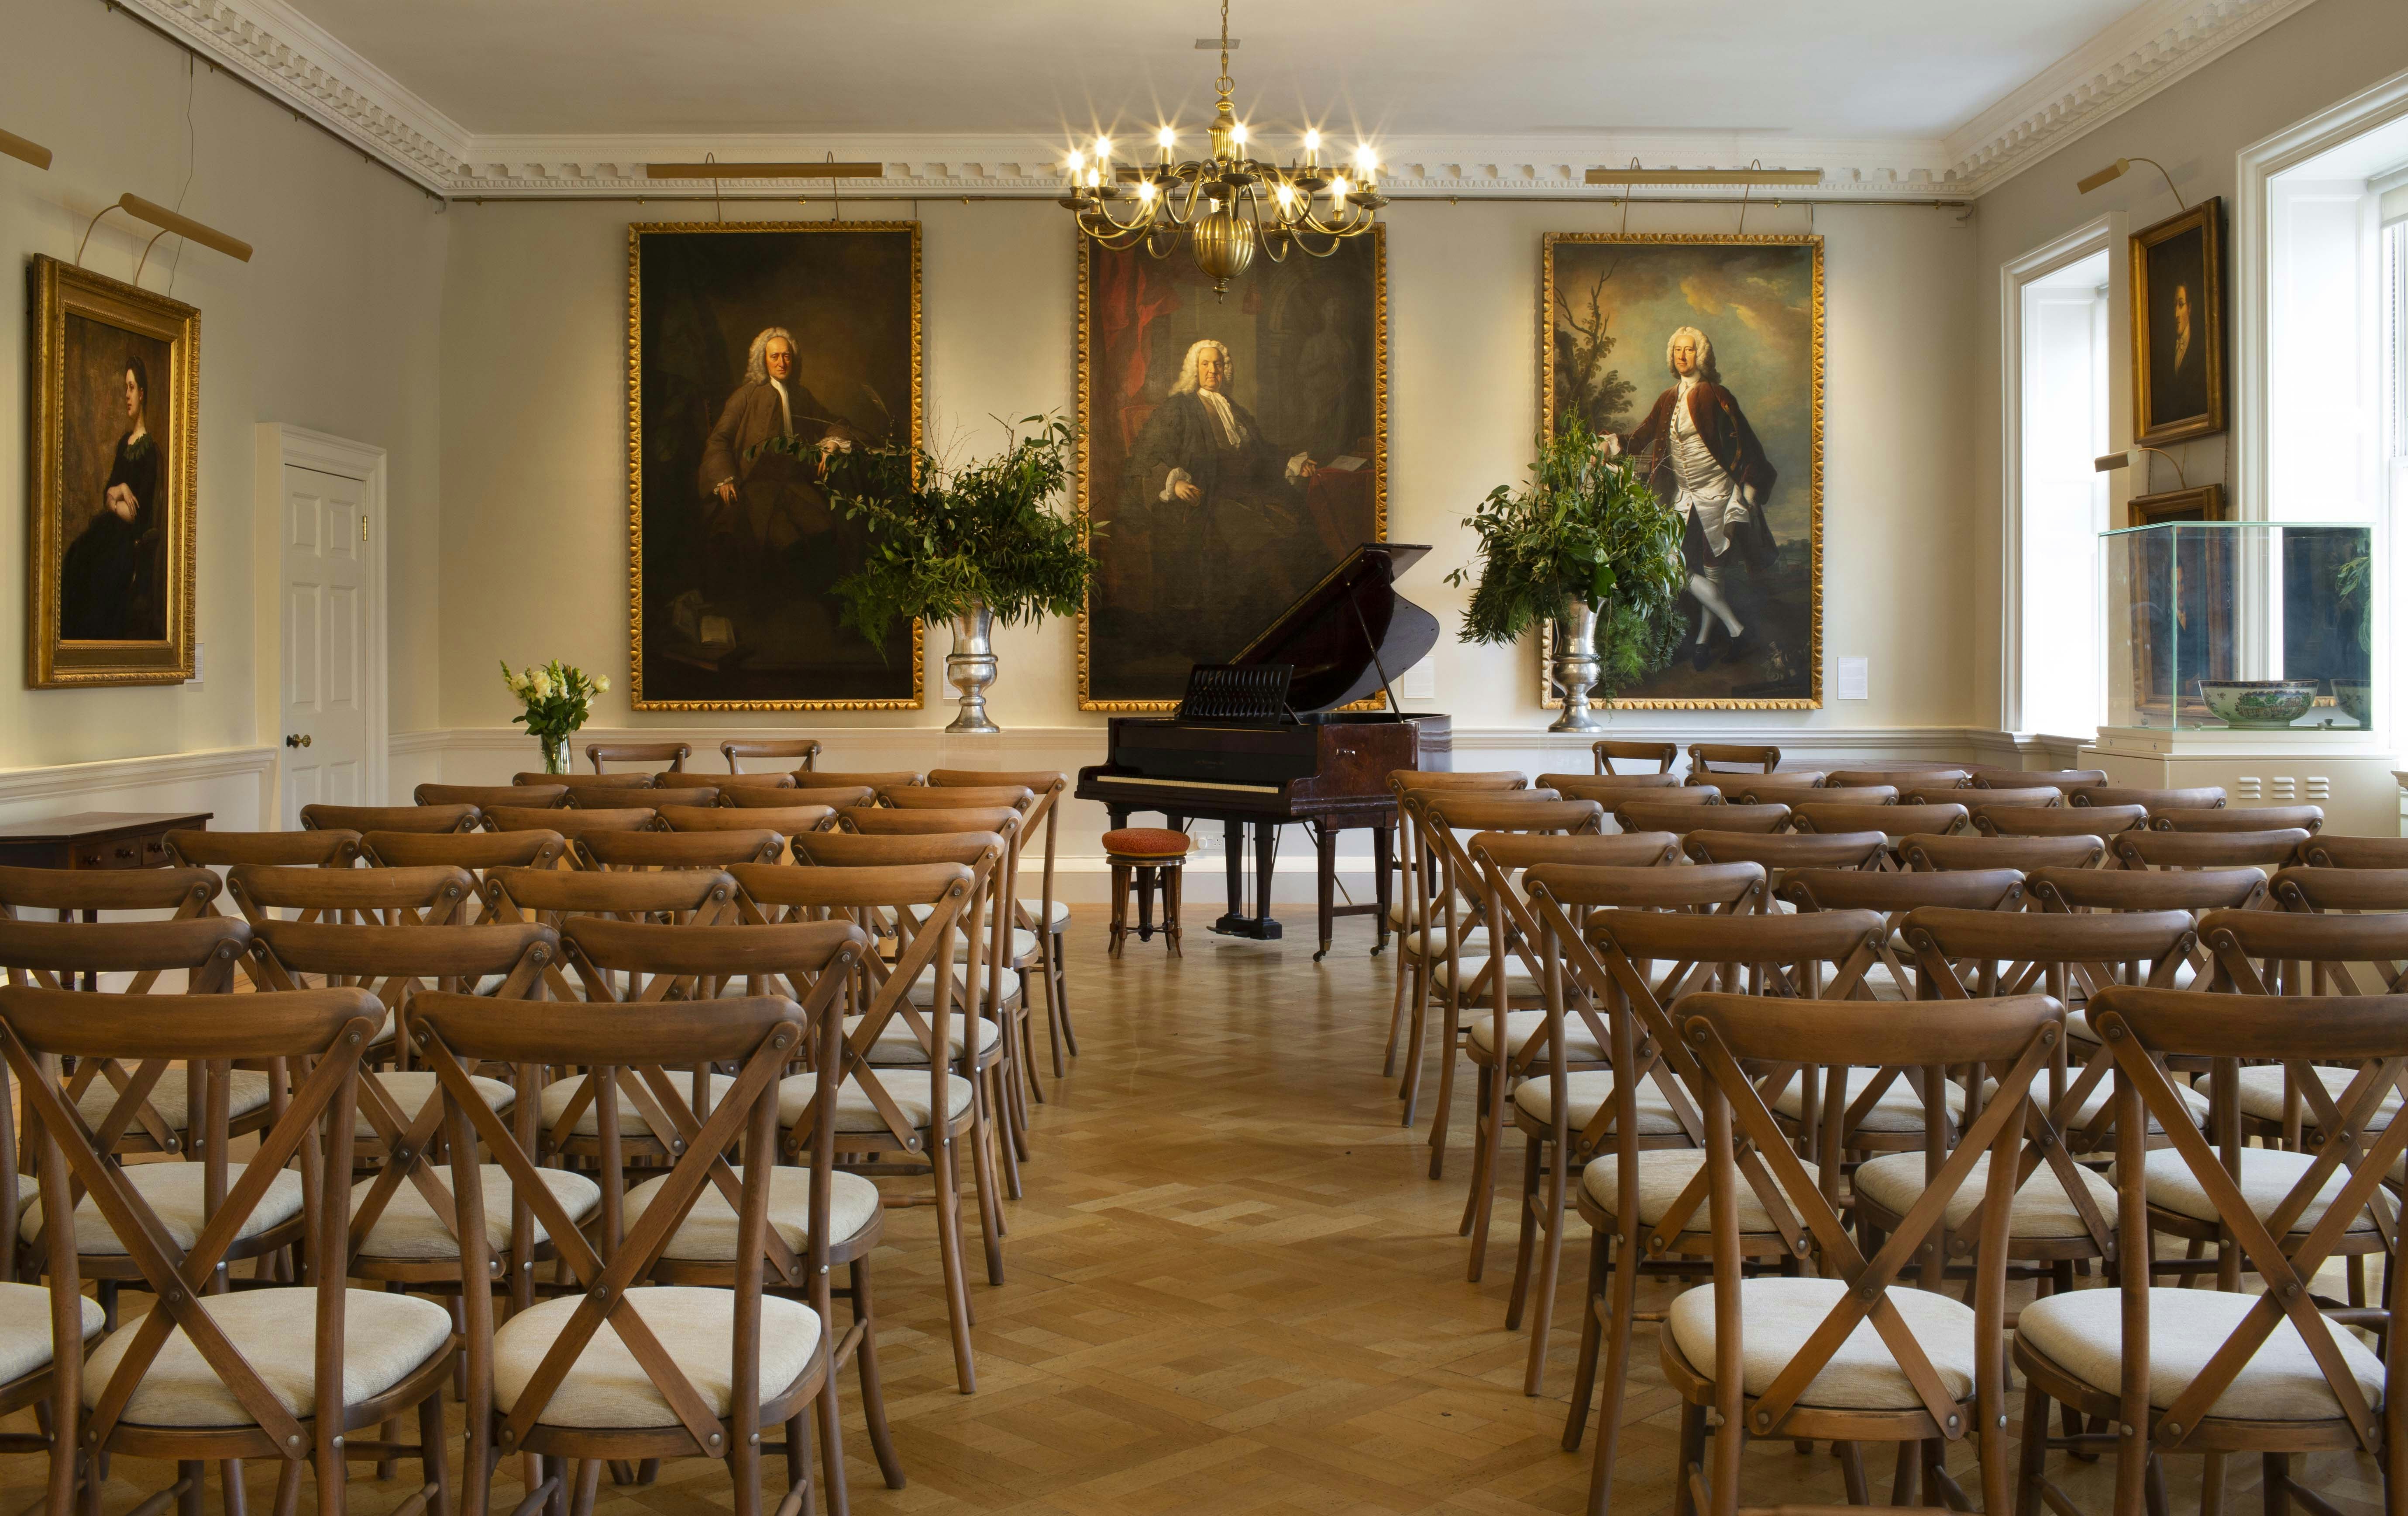 Private Dining Rooms Venues in Clerkenwell - The Foundling Museum